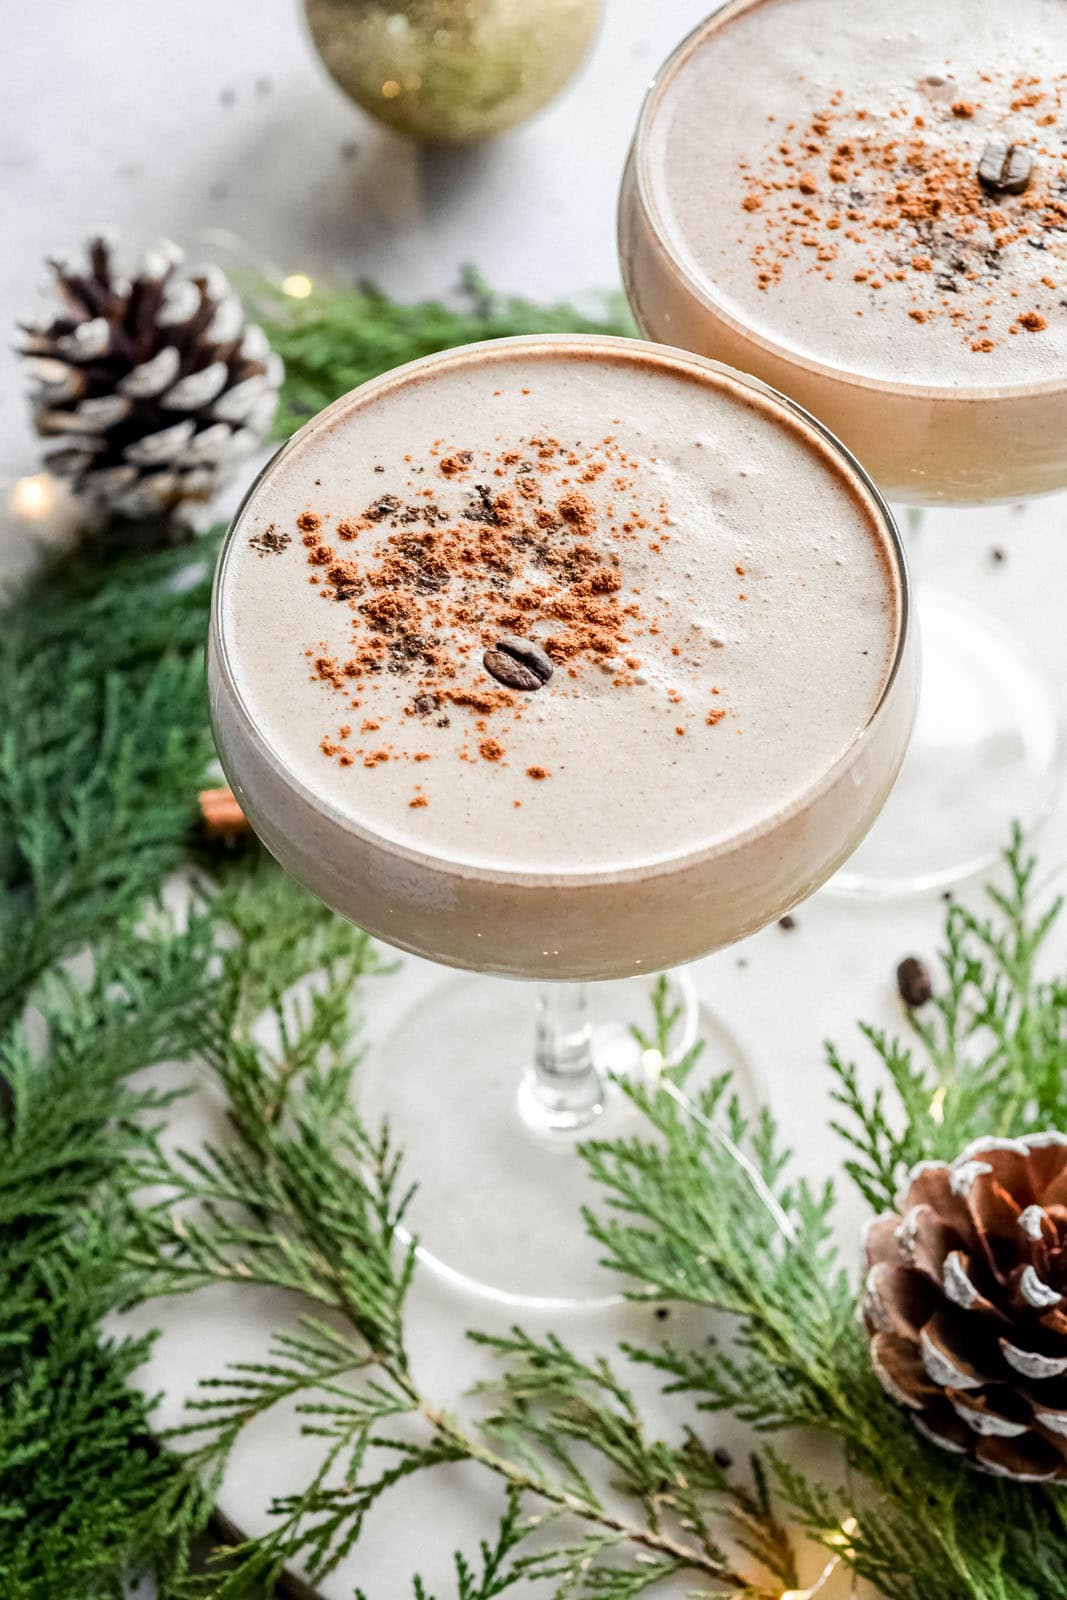 This eggnog espresso martini with rum is a luscious and festive homemade holiday cocktail. Made with your favorite eggnog, rum (or whiskey or vodka!), coffee liqueur, cold brew coffee or espresso, vanilla, and cinnamon. The perfect eggnog martini recipe to enjoy during the holiday season! Easily made dairy free by using a plant based (vegan) eggnog. #eggnog #holidays #homebartending #christmas #cocktail